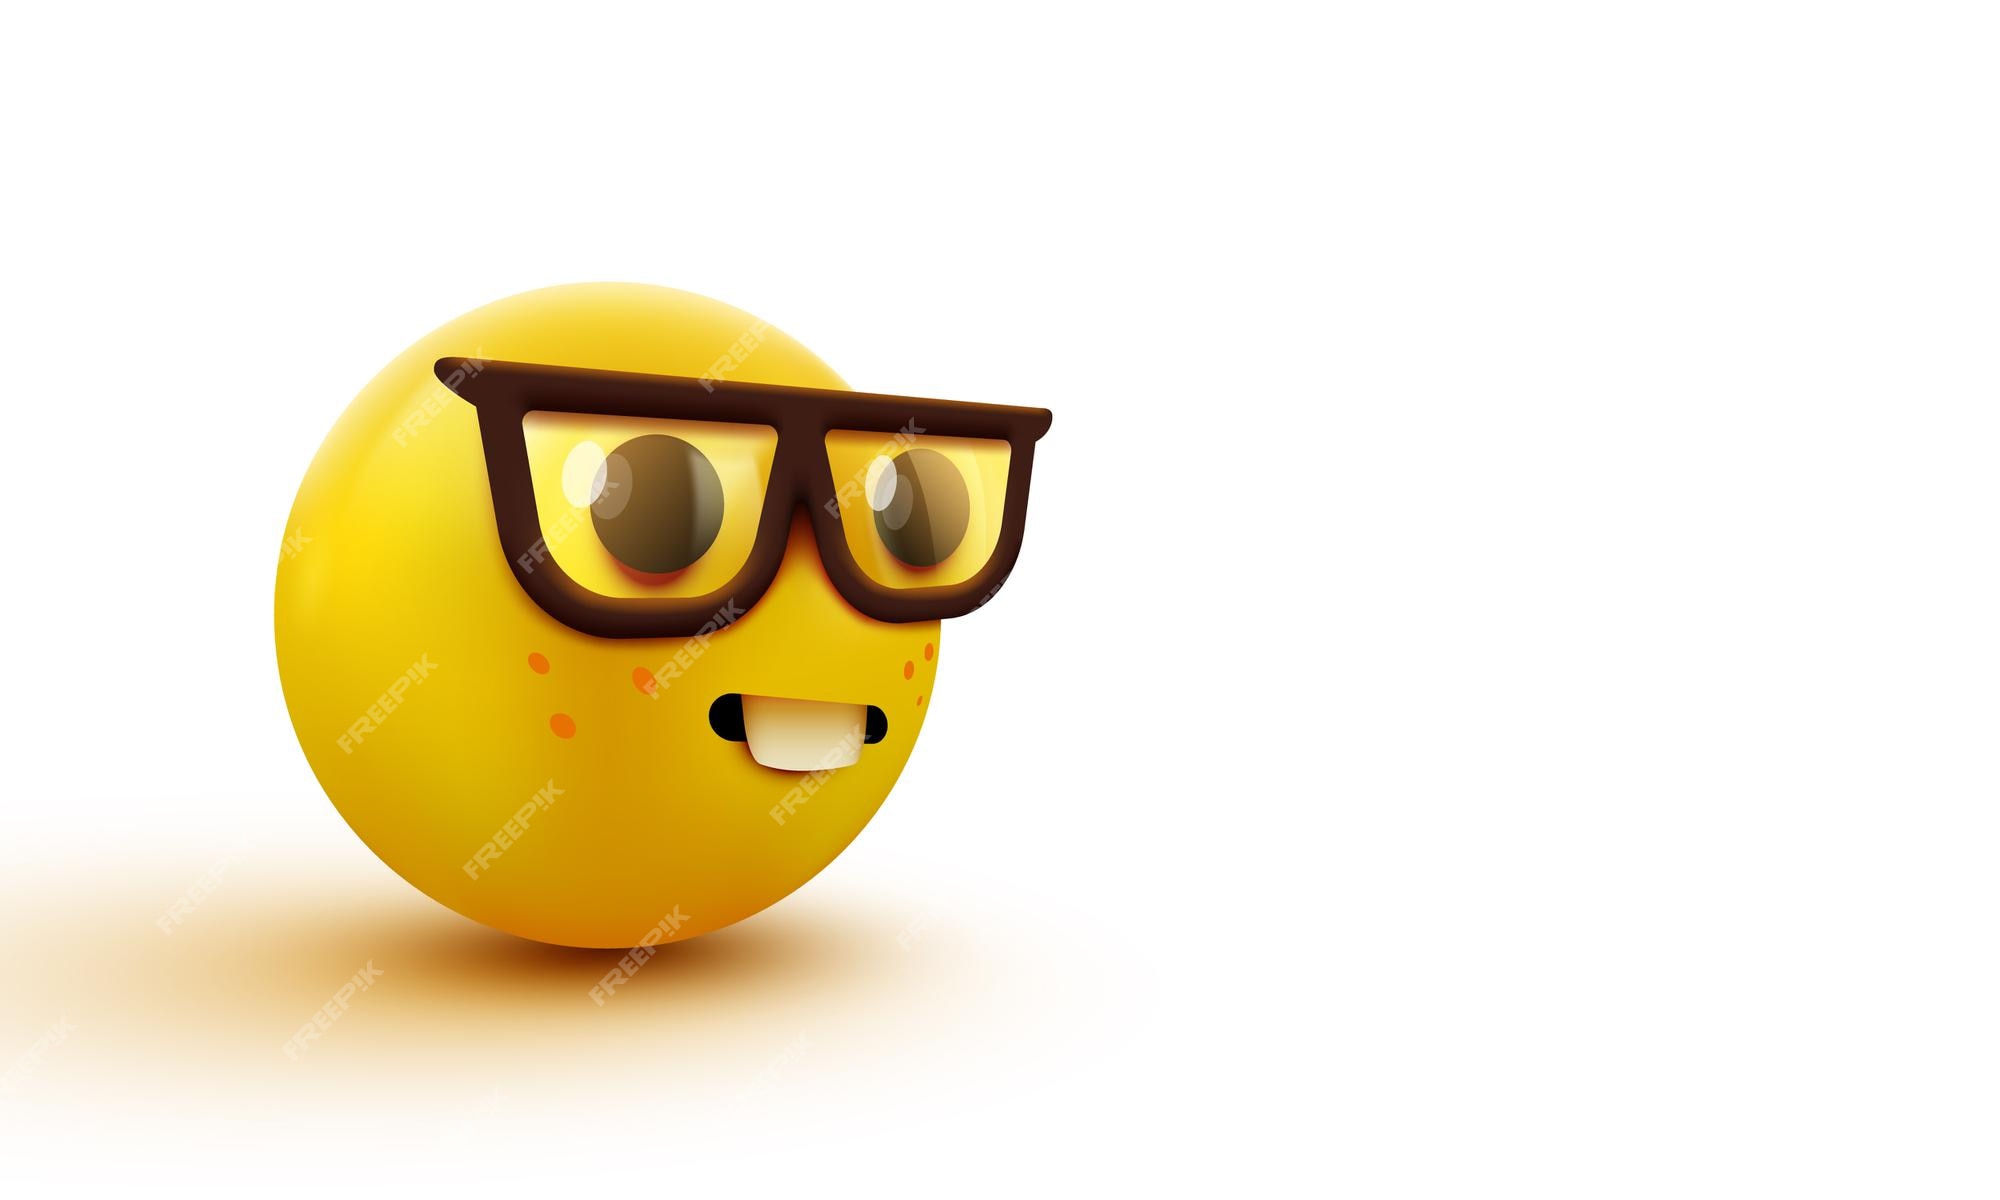 nerd-face-emoji-clever-emoticon-with-glasses_3482-1932.jpg